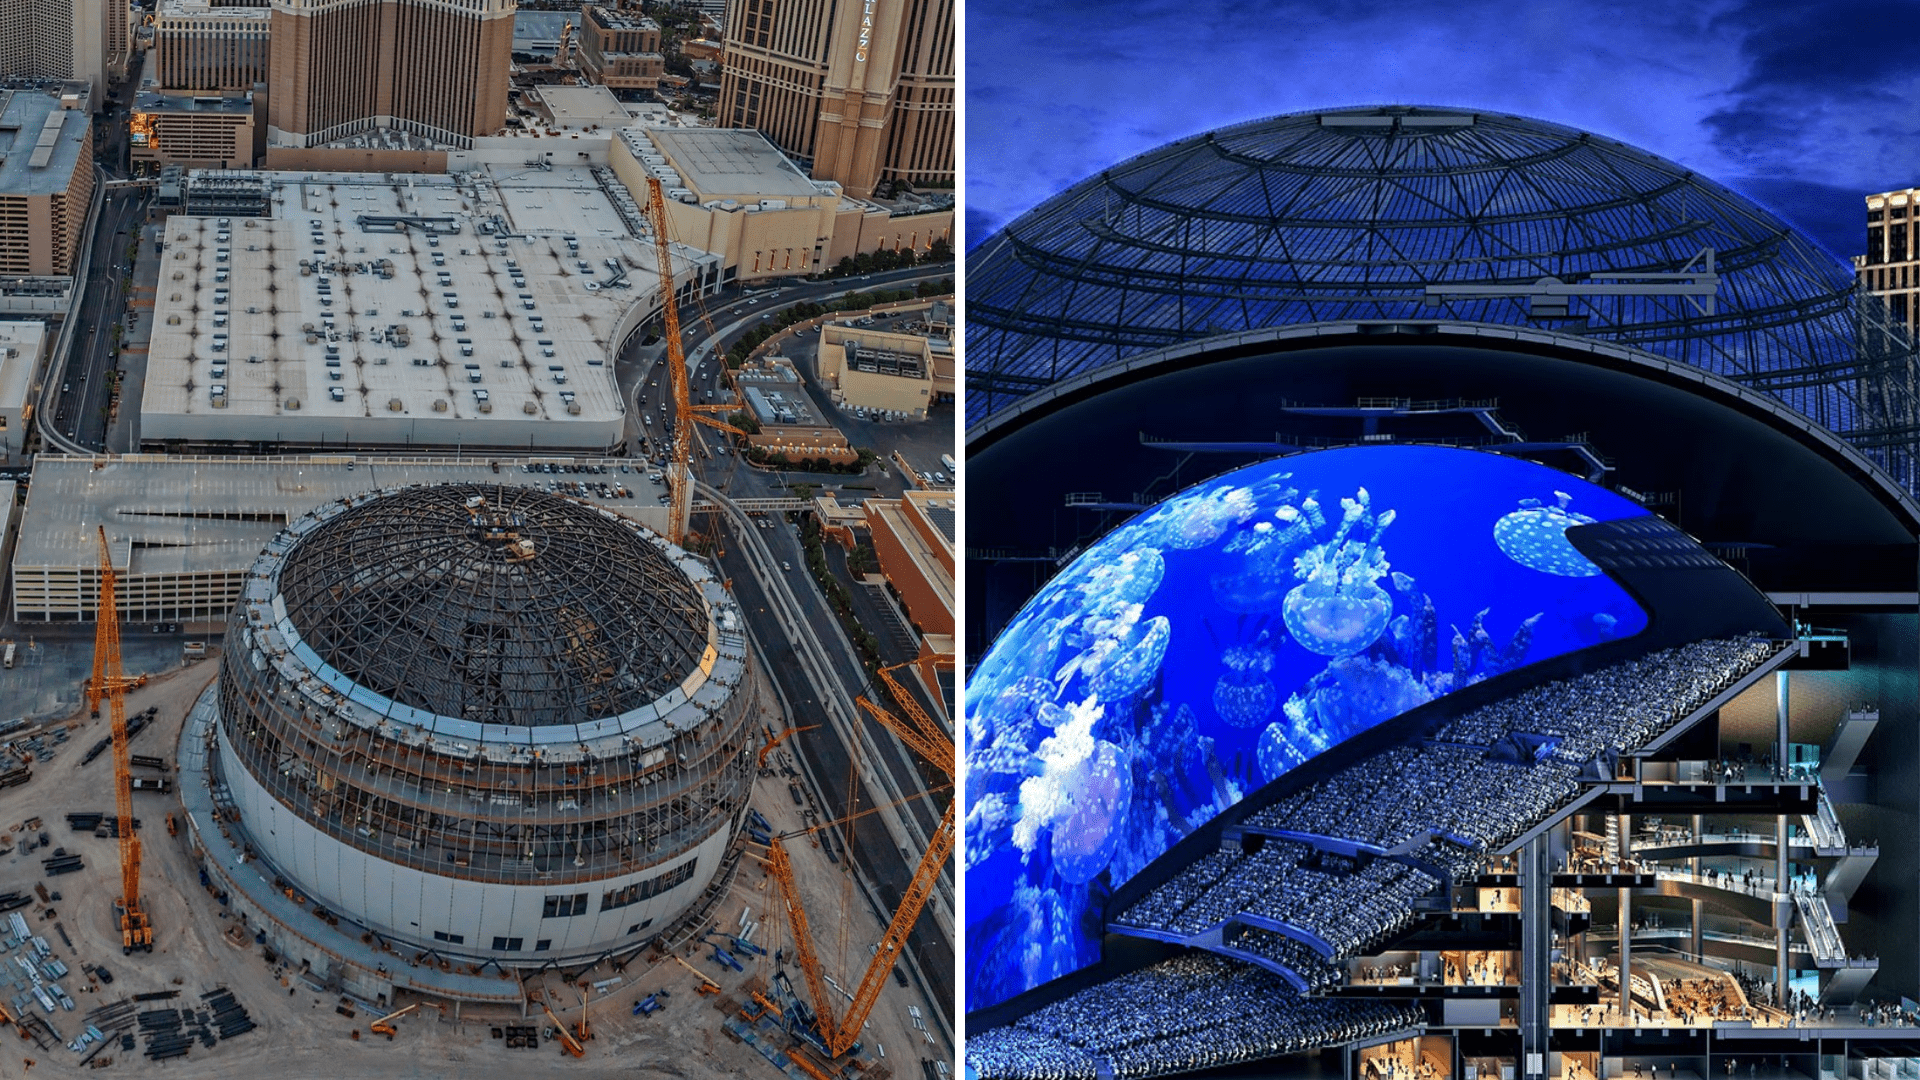 MSG Sphere: the new Las Vegas entertainment venue ready to blow minds has resumed construction